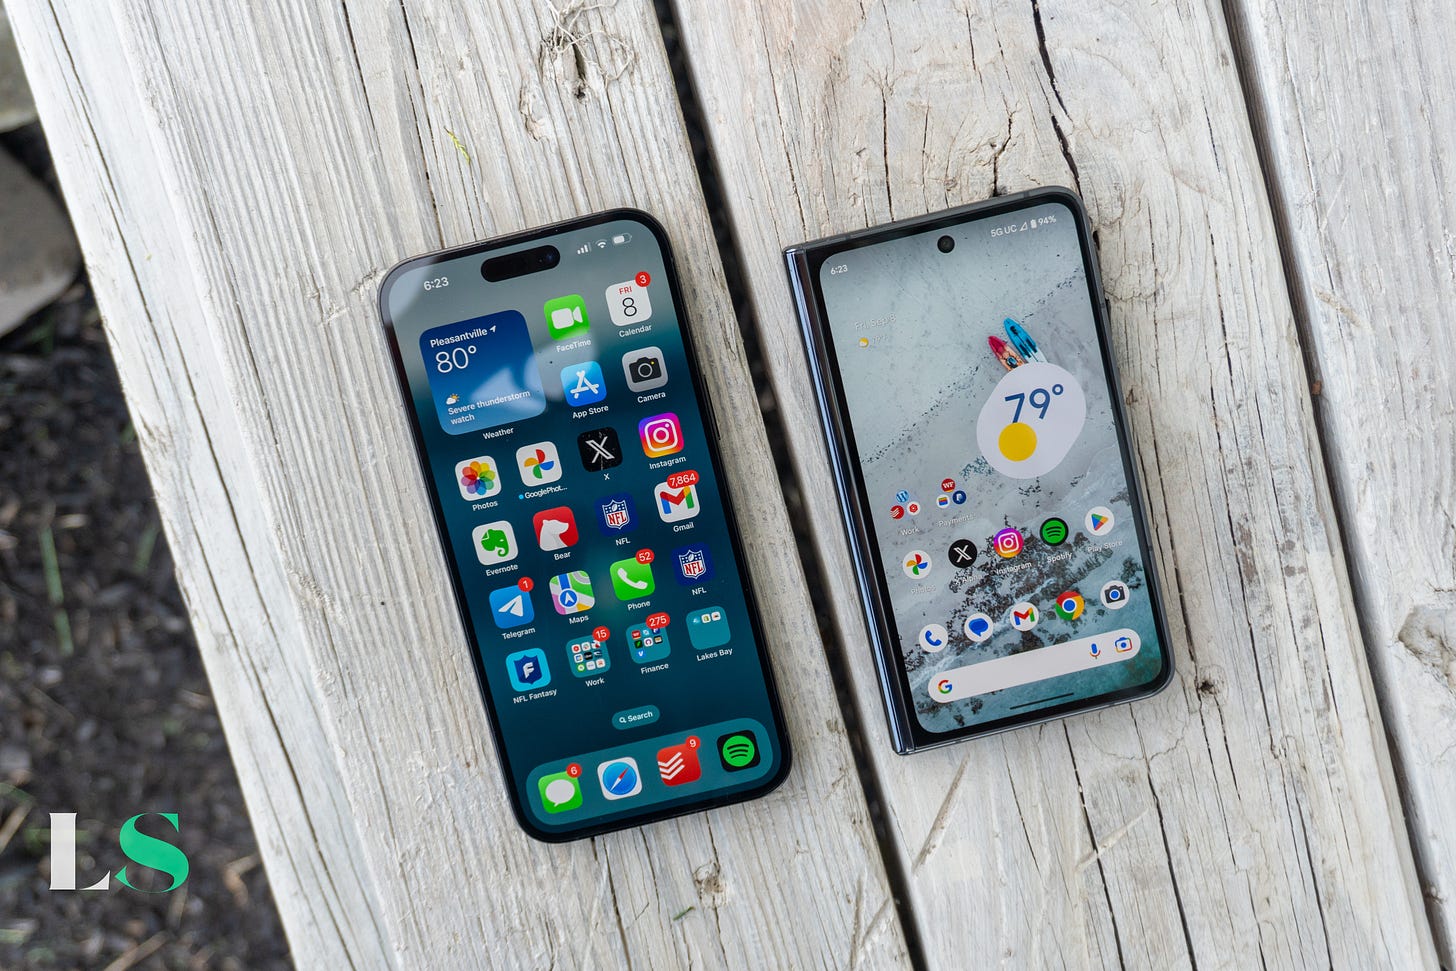 Apple iPhone 14 Pro Max next to the Google Pixel Fold on a wooden bench.